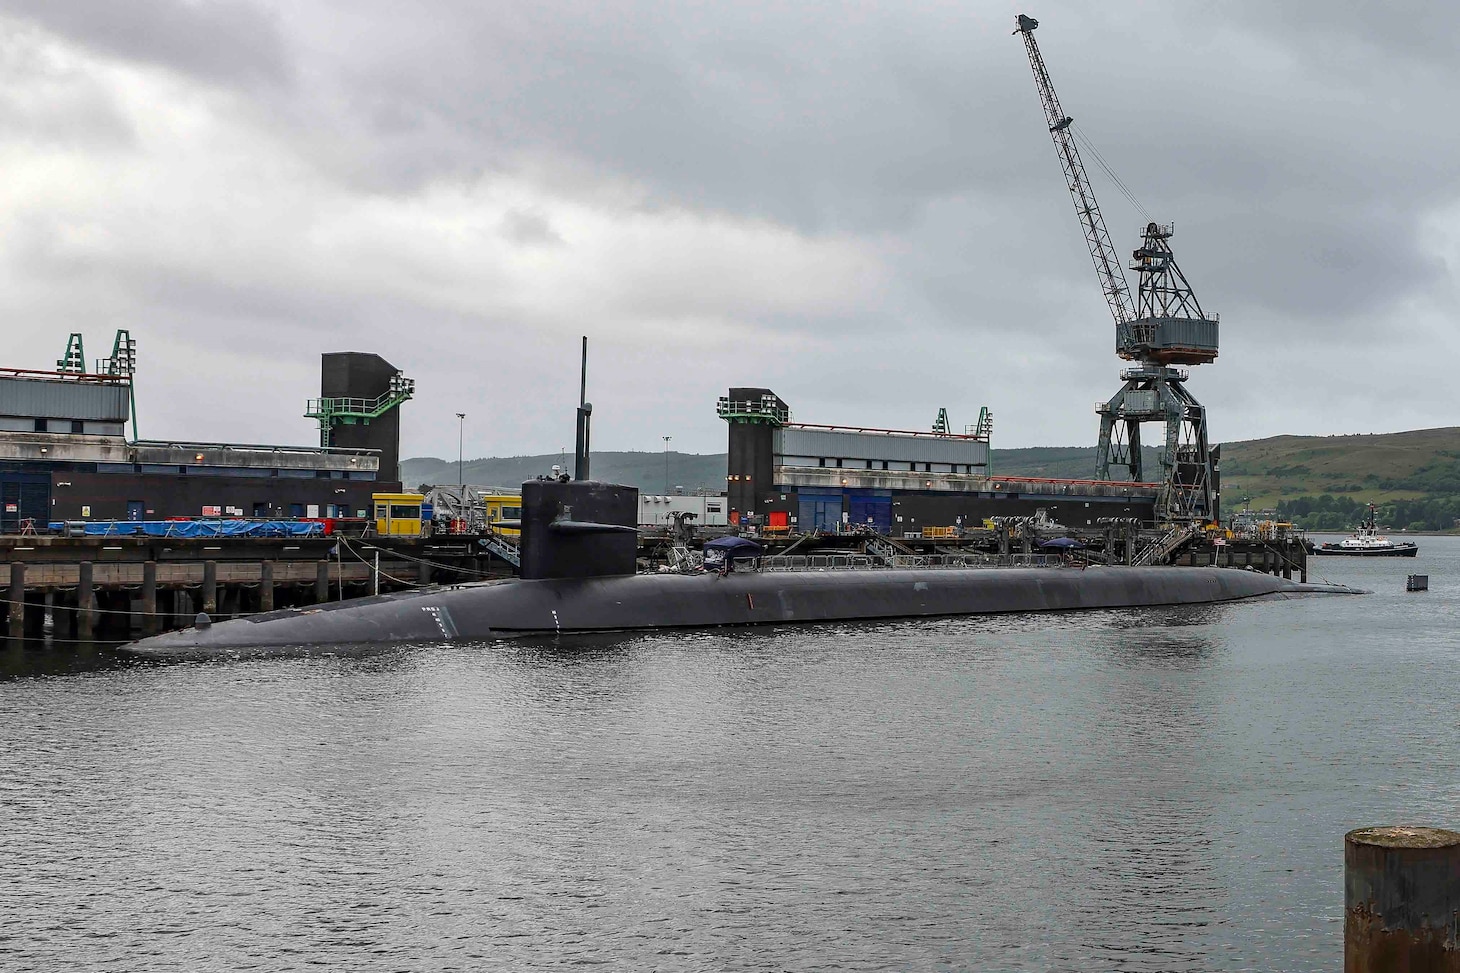 The Ohio-class ballistic-missile submarine USS Rhode Island (SSBN 740) is docked at Her Majesty's Naval Base, Clyde, United Kingdom, July 4, 2022.